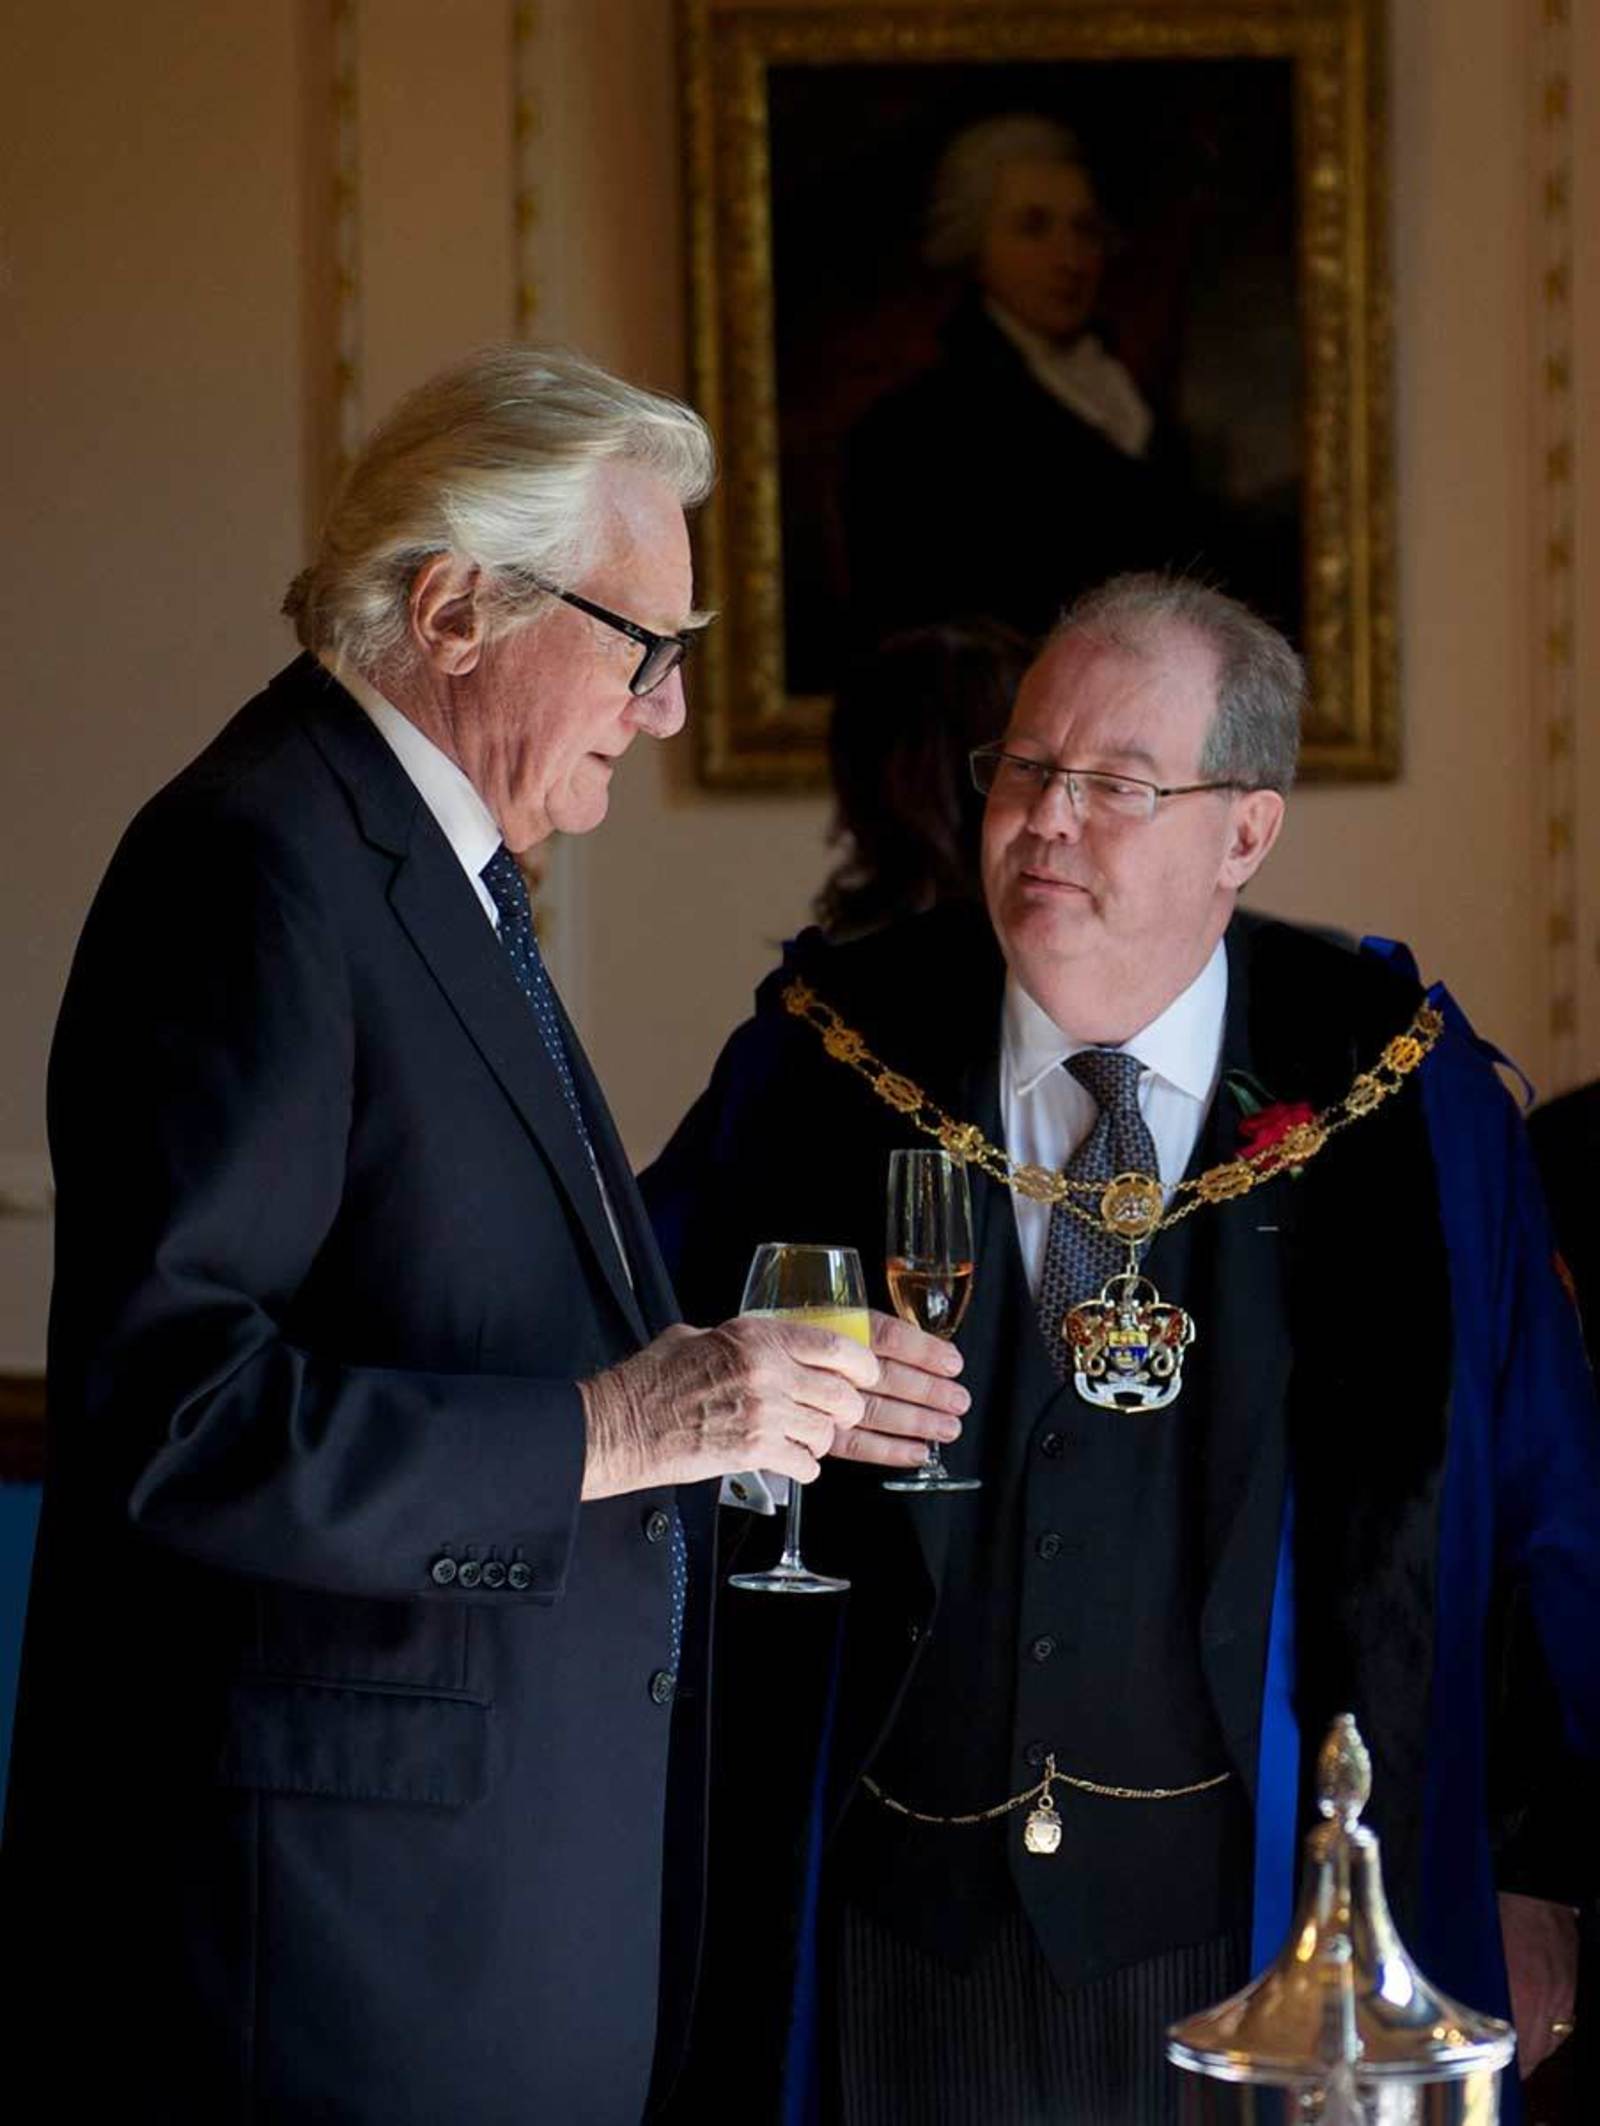 With Lord Heseltine